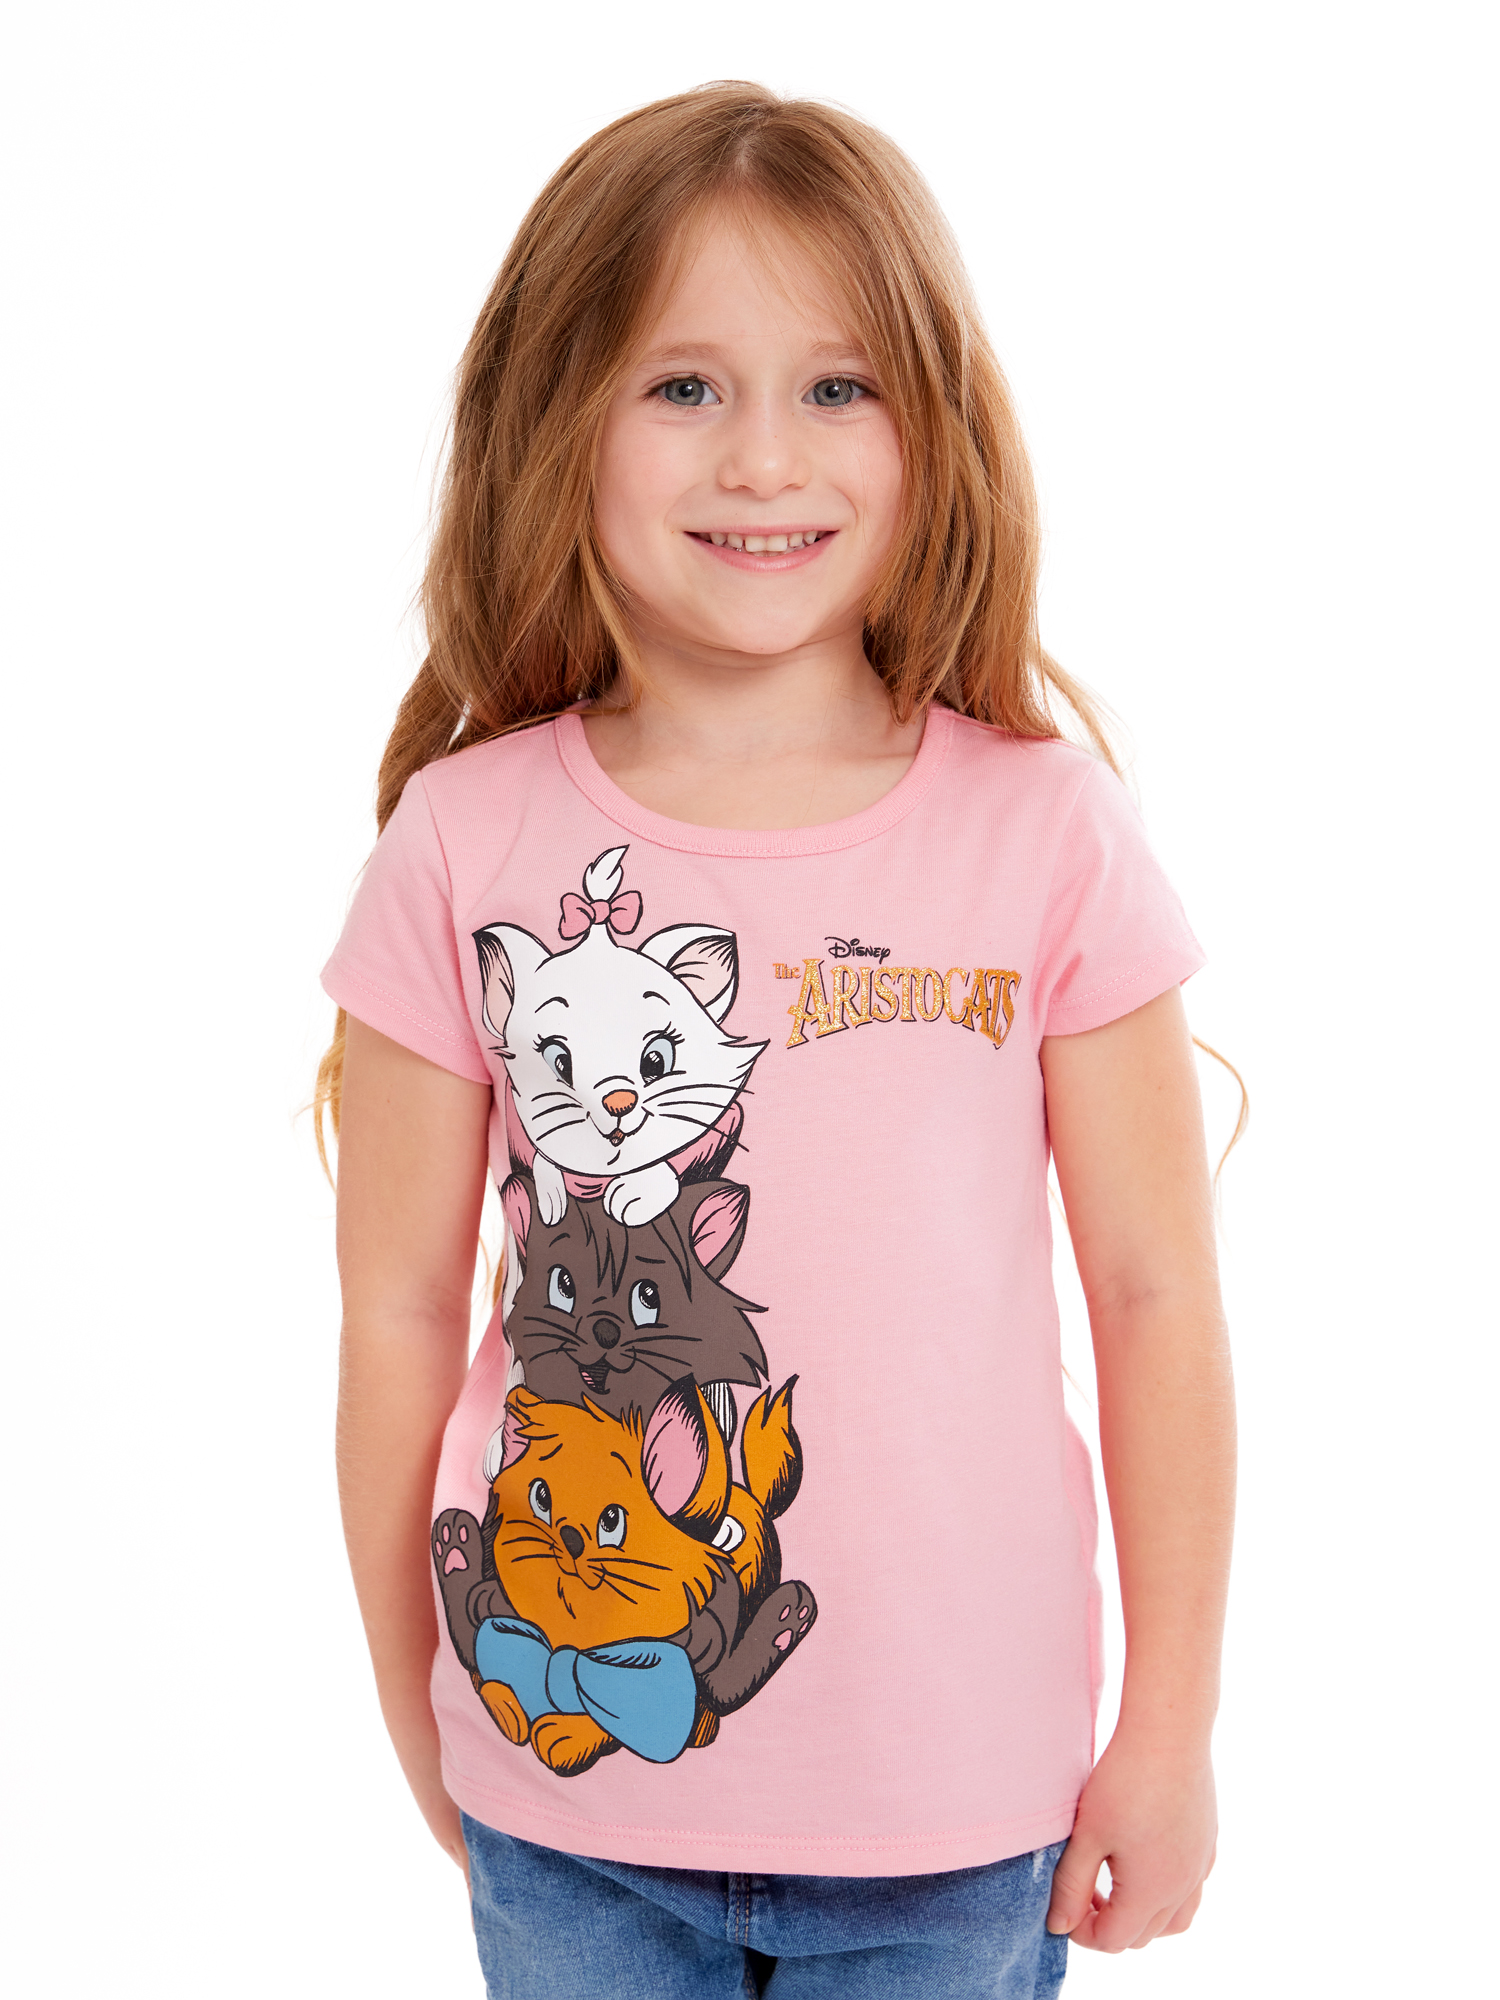 Disney Classics Toddler Girl Graphic Print Fashion T-Shirts, 4-Pack, Sizes 2T-5T - image 5 of 13